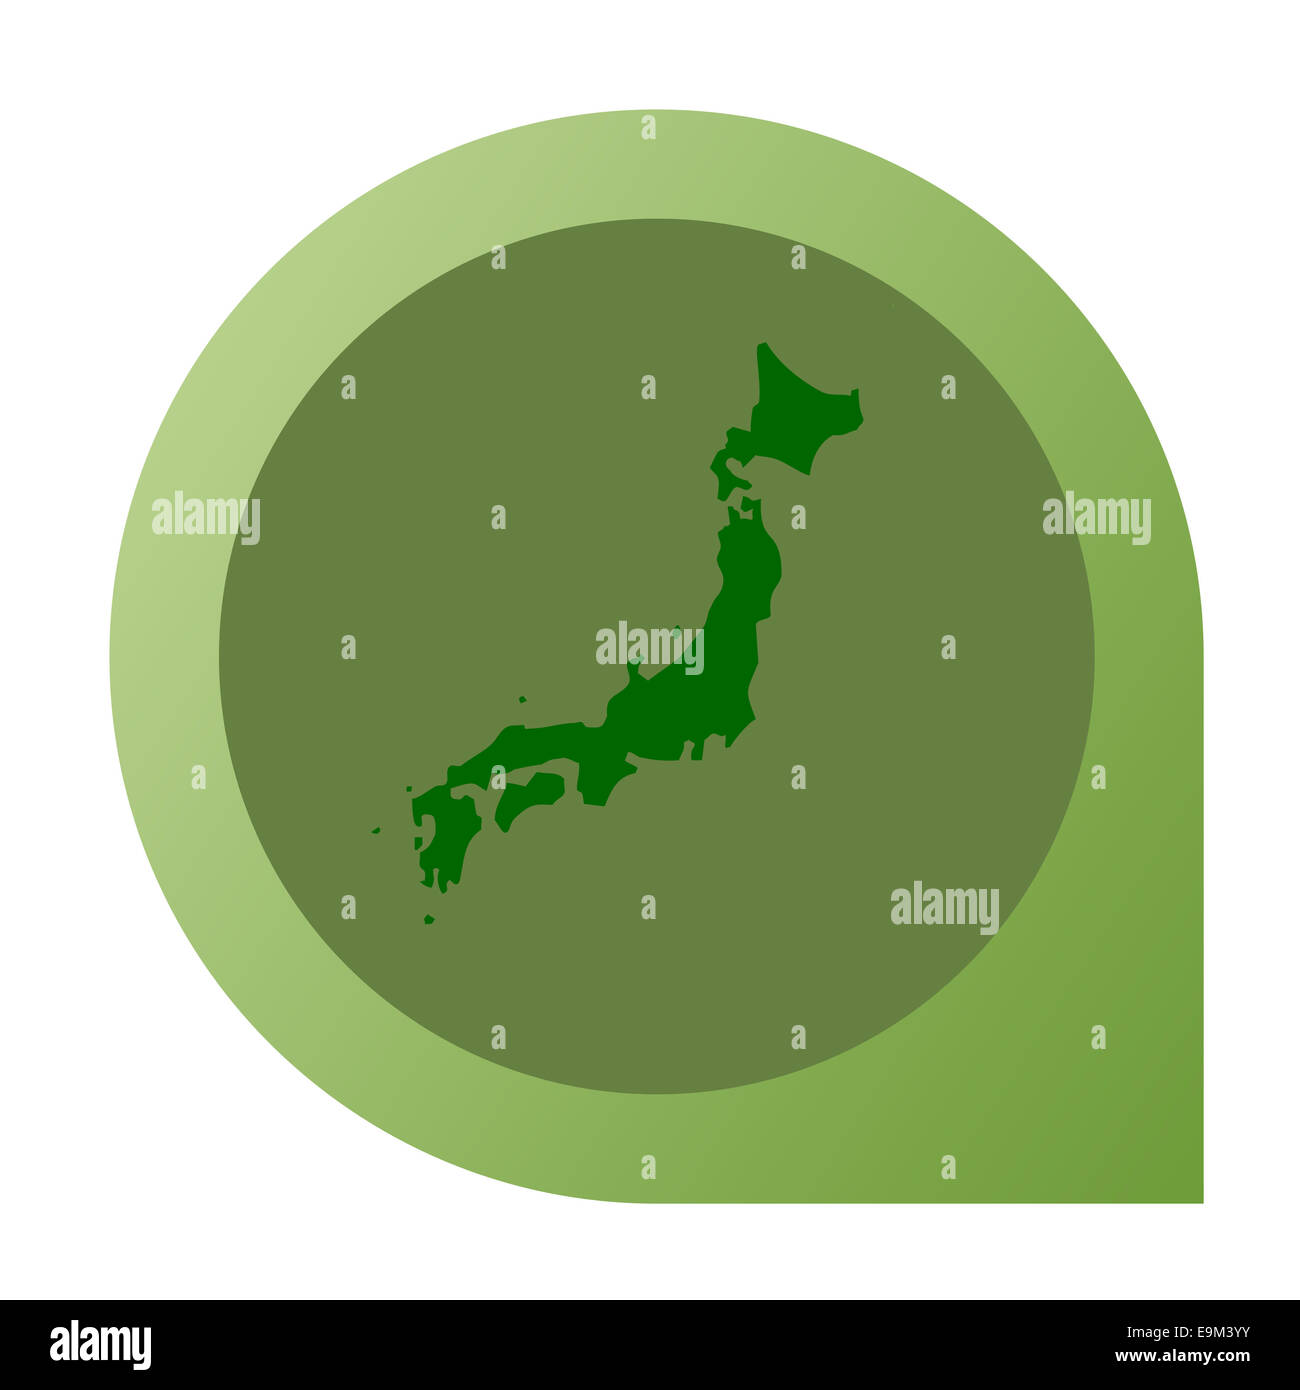 Isolated Japan map marker pin in flat web design style. Stock Photo